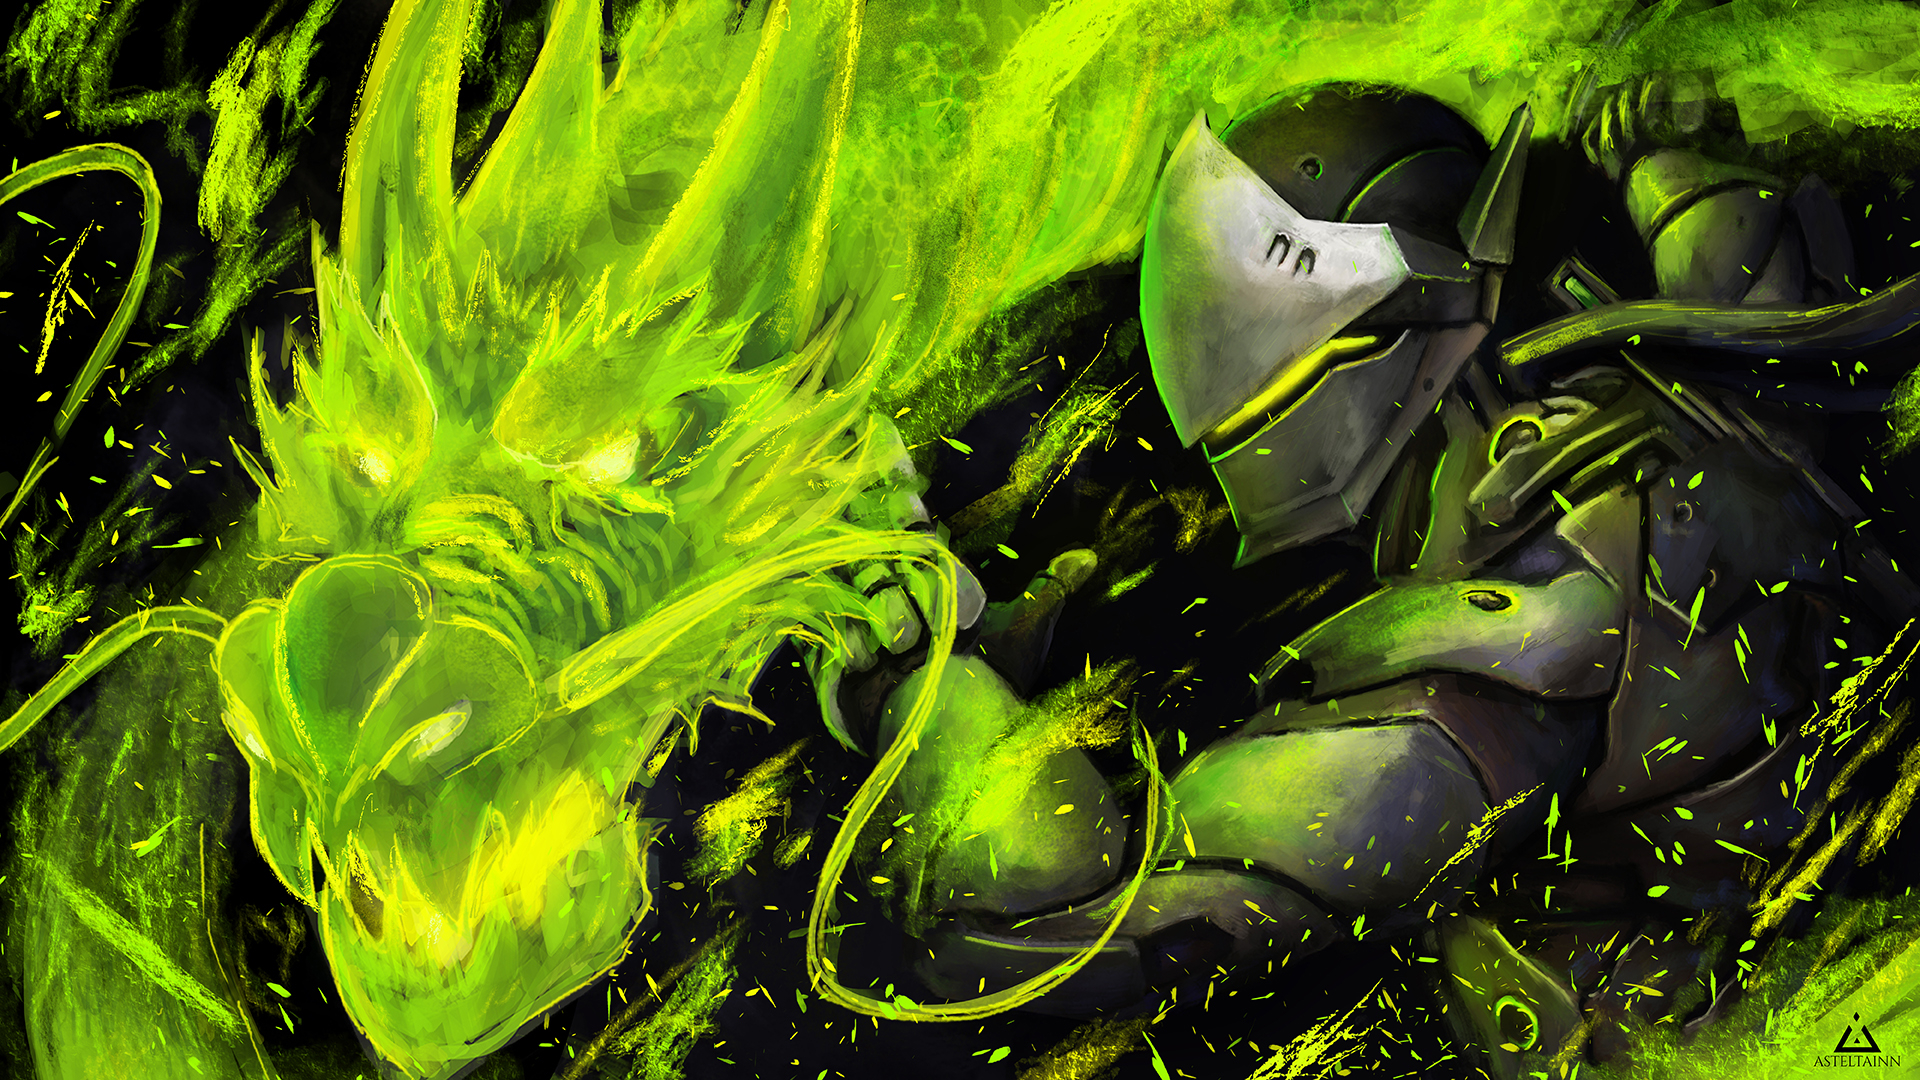 1920x1080 150+ Genji (Overwatch) HD Wallpapers and Backgrounds